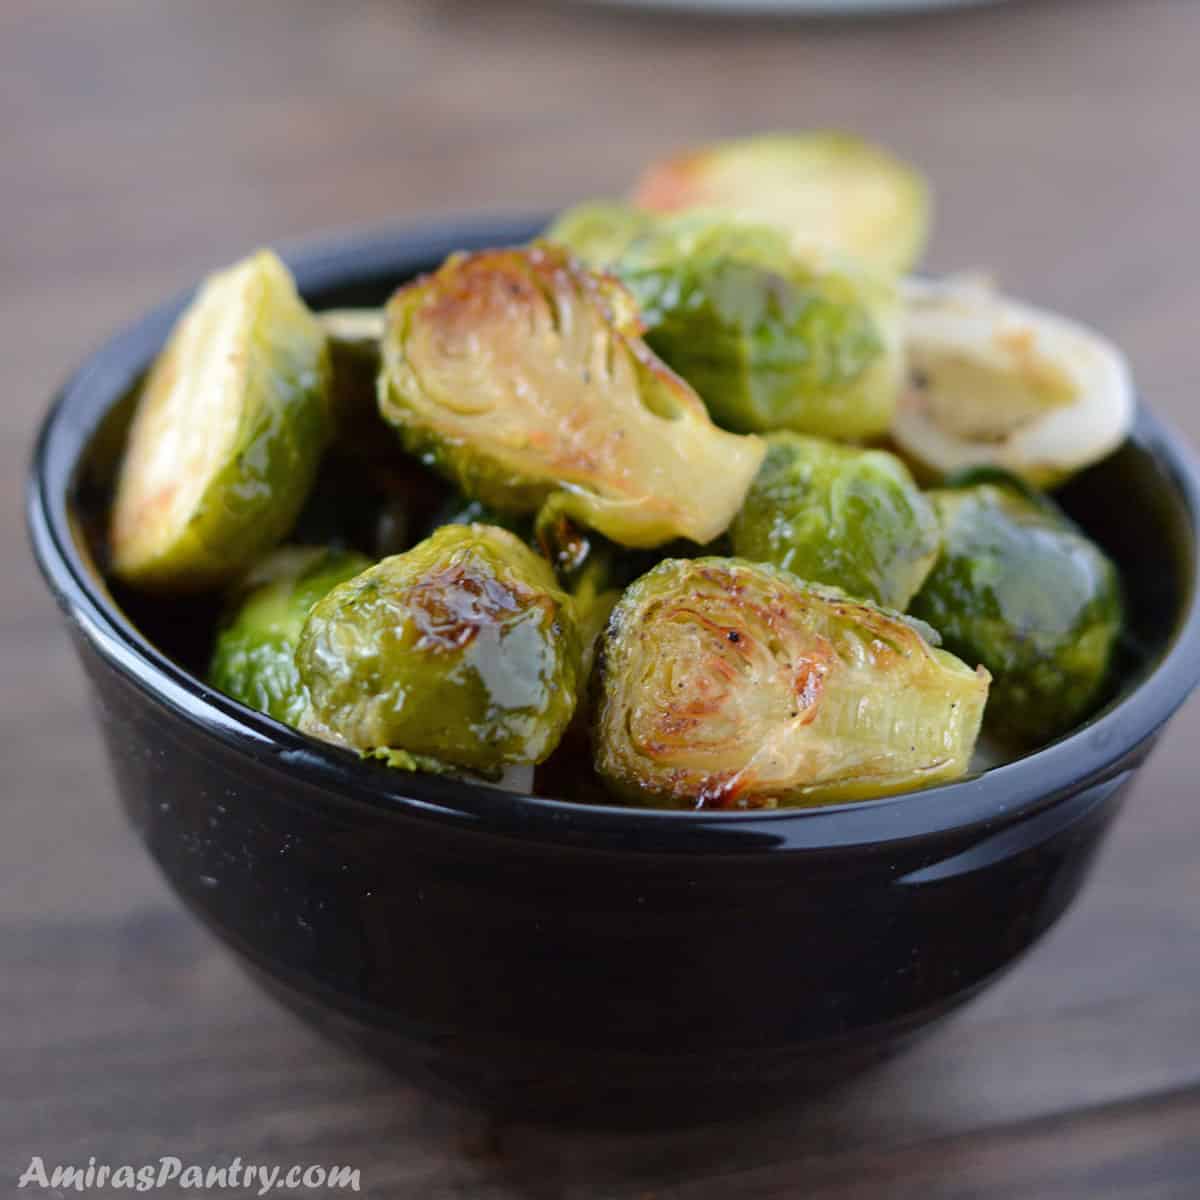 A pile of brussels sprouts in a black bowl placed on a wooden surface.